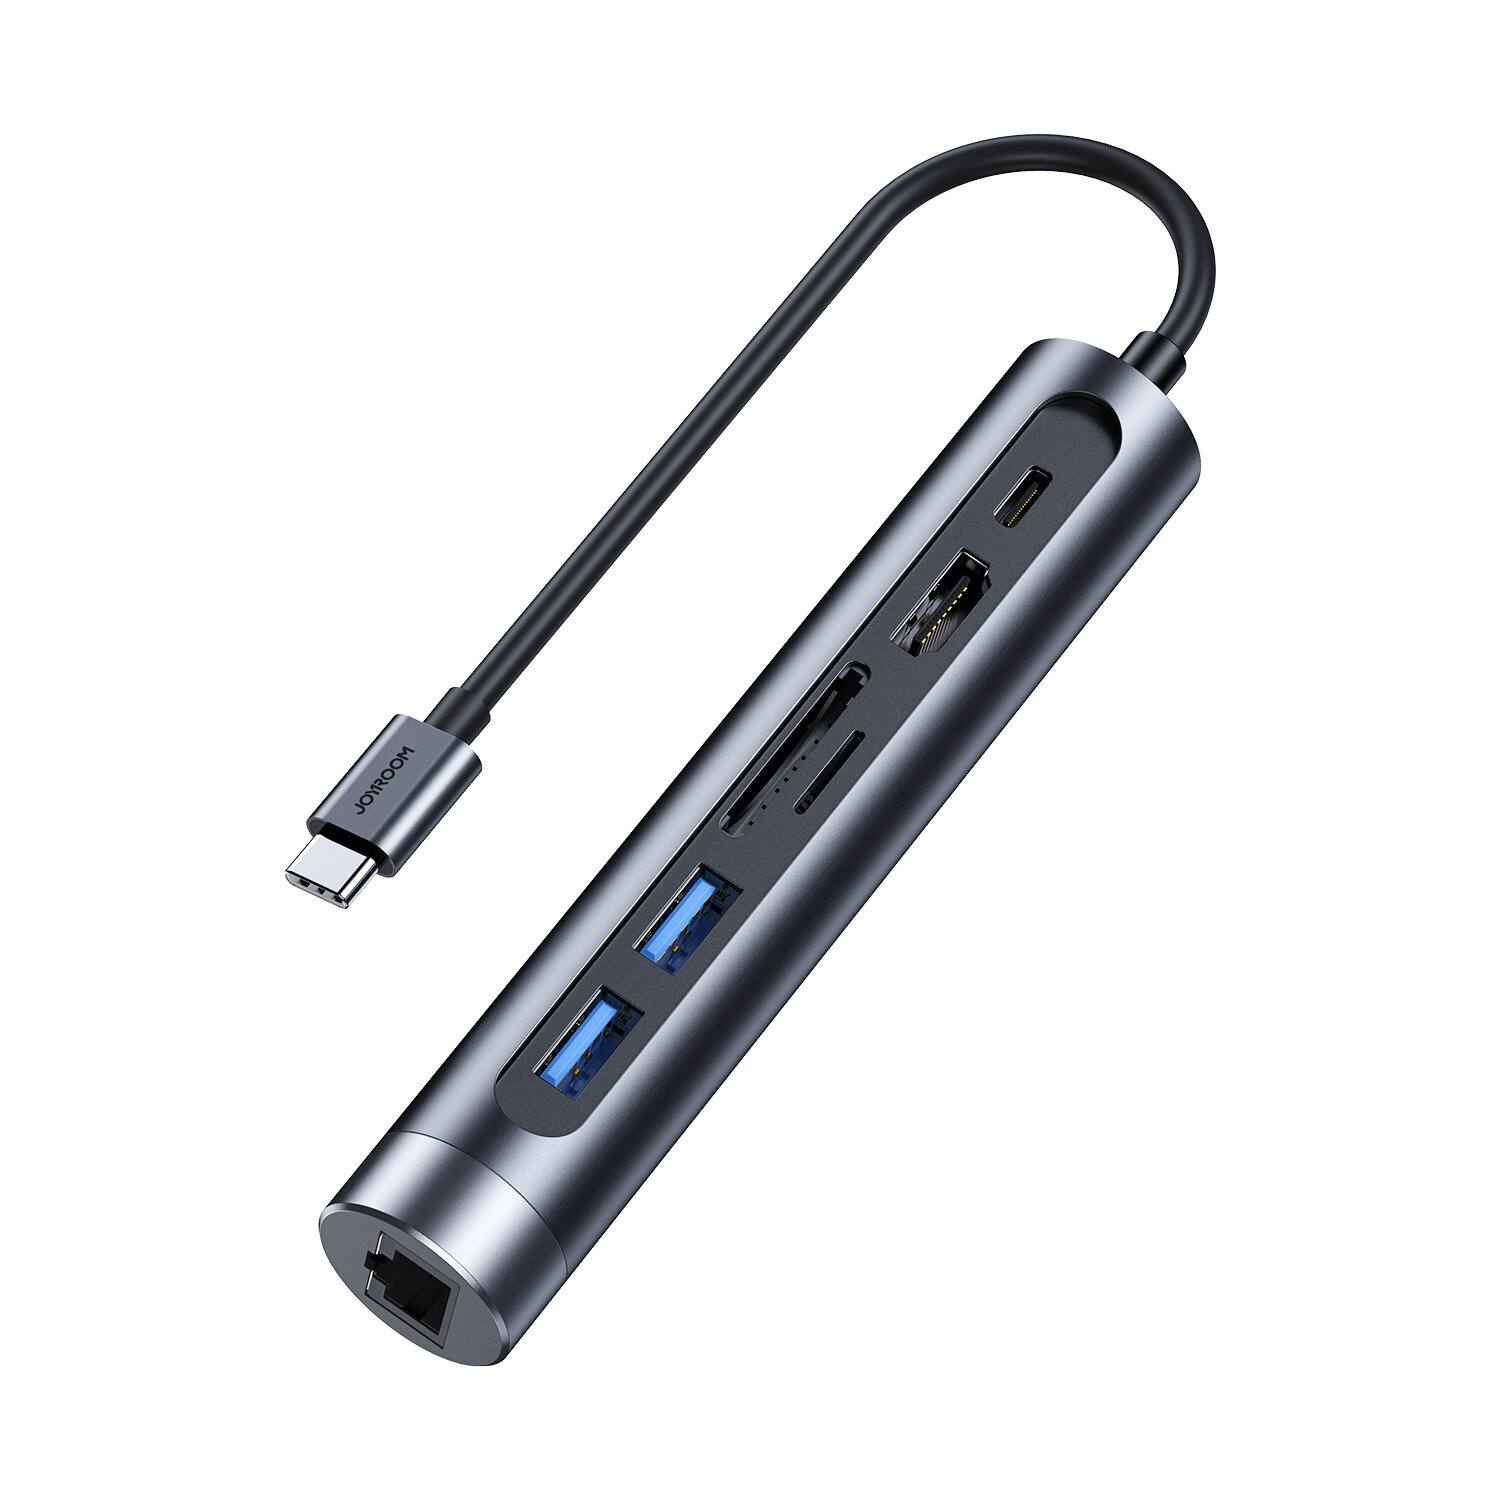 

Joyroom 7 In 1 Type-C Hub Docking Station Adapter with 2*USB3.0 + PD Fast Charging + SD/ TF Card Slot + HDMI + Gigabit N